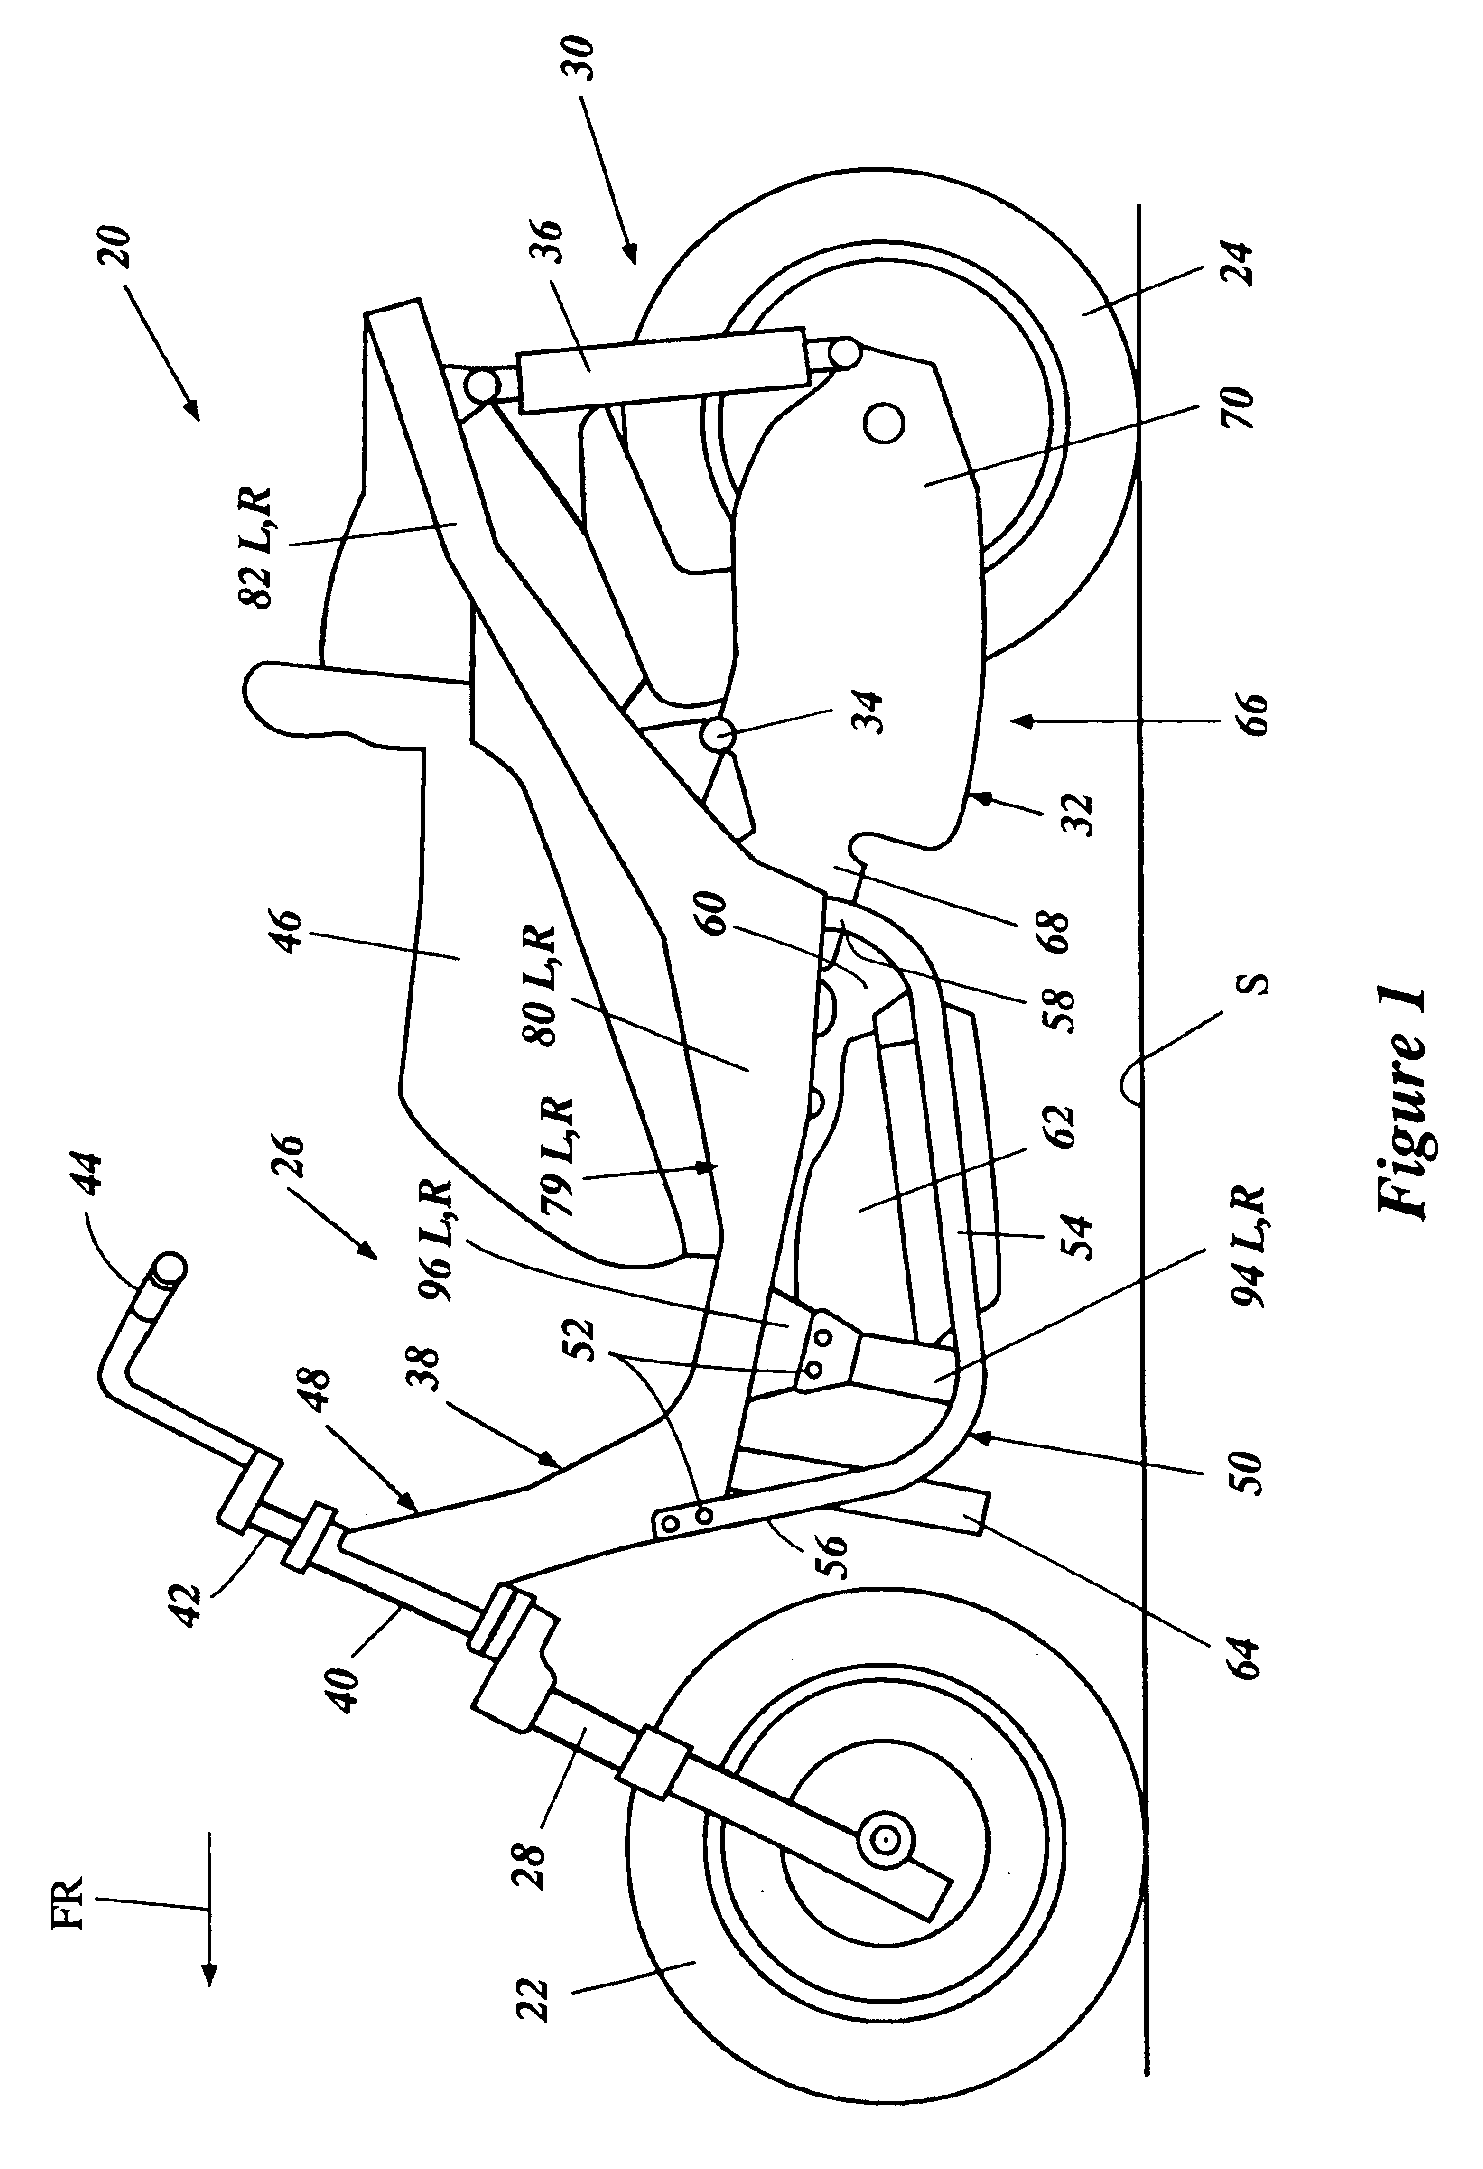 Frame assembly for scooter-type vehicle